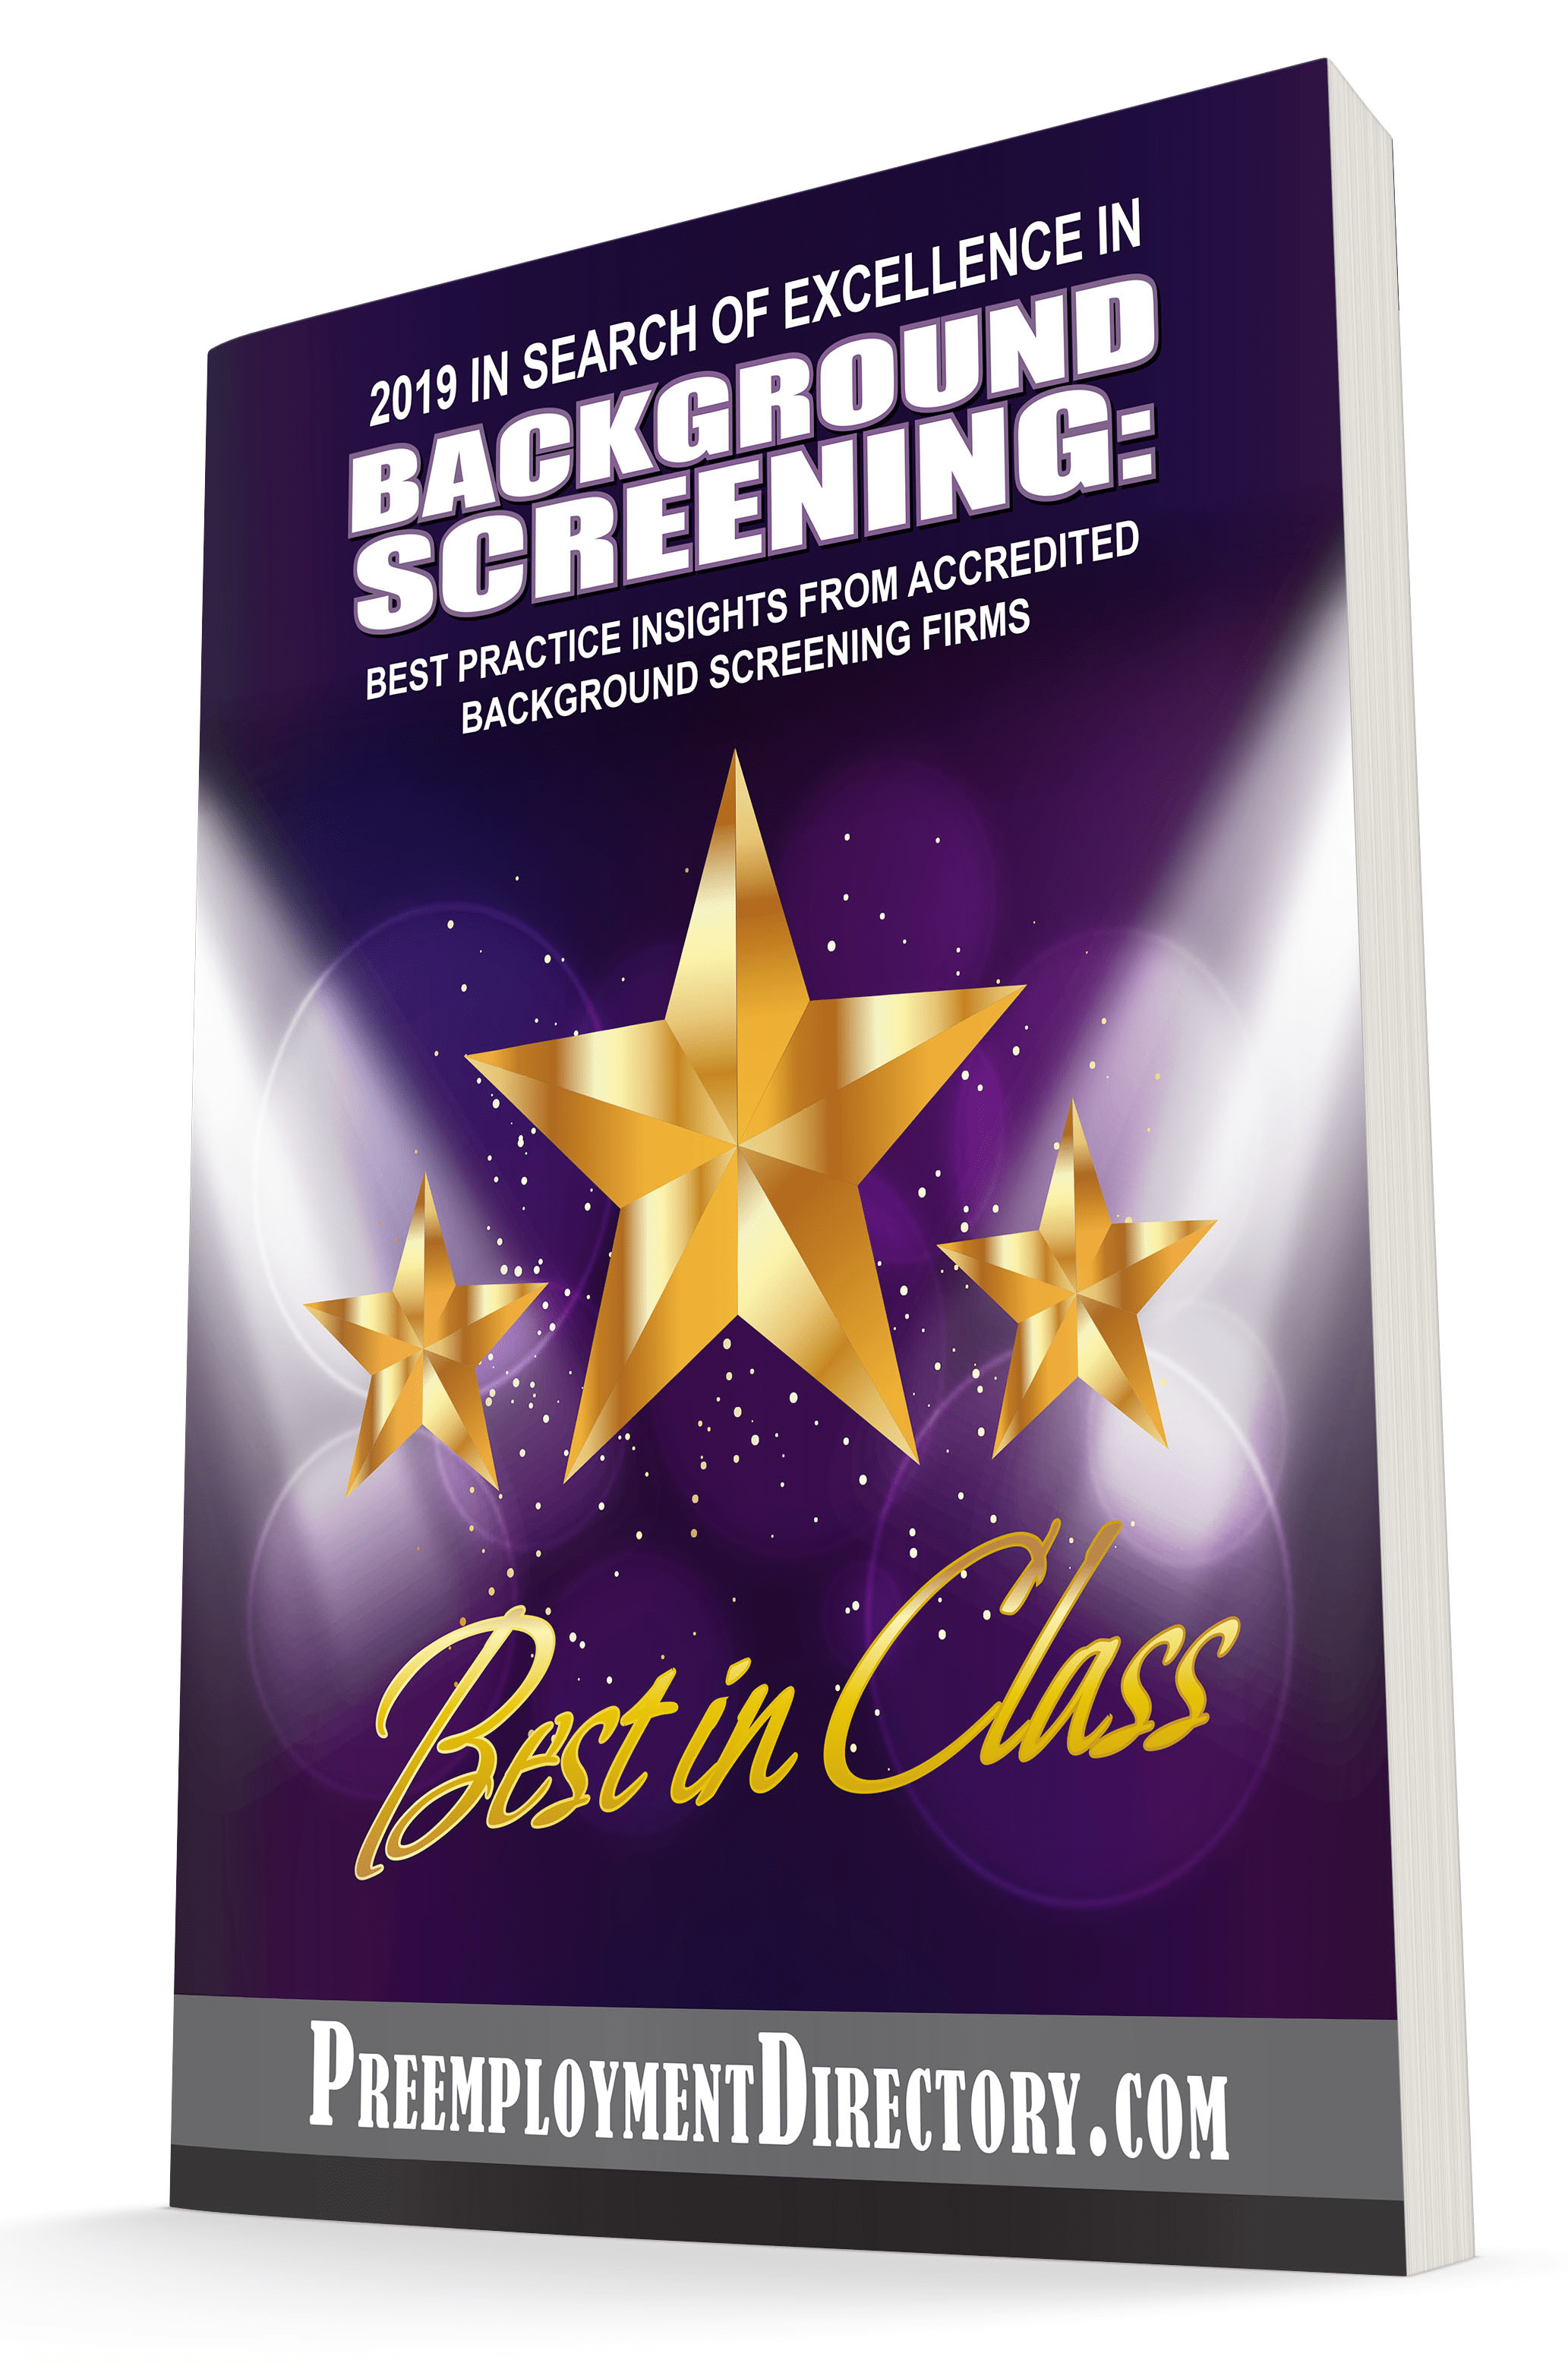 2019 In Search of Excellence in Background Screening Cover